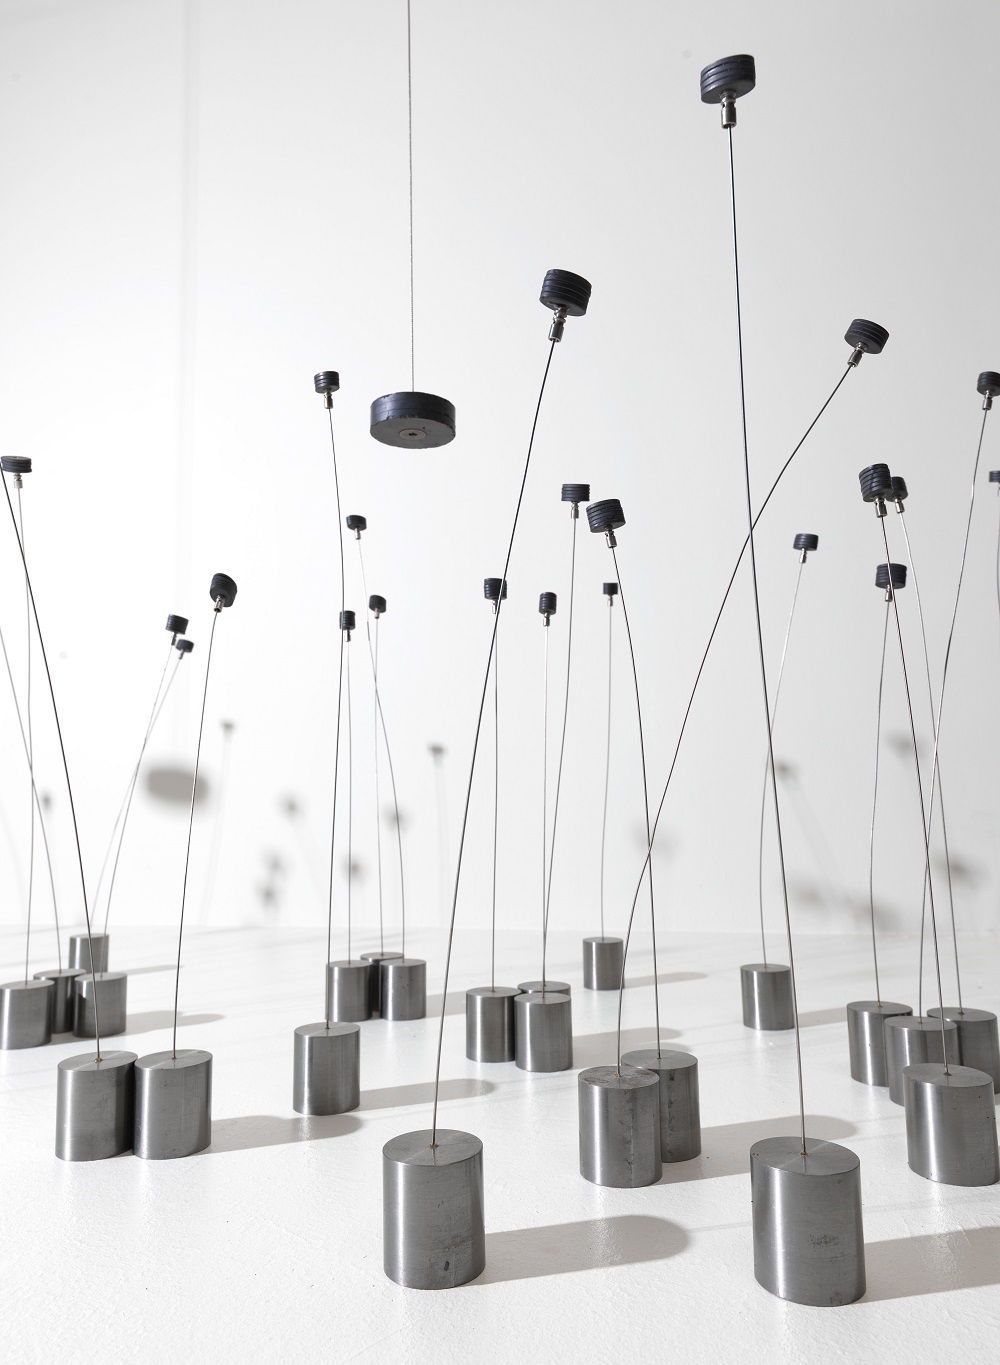 'Magnetic Fields'(detail), 1969, Metal, magnets, wire, 63.5 × 426.7 × 91.4cm, Solomon R. Guggenheim Museum, New York.Partial gift, Robert Spitzer, by exchange, 1970© ADAGP, Paris and DACS, London 2019 Photo: Solomon R. Guggenheim Museum, New York